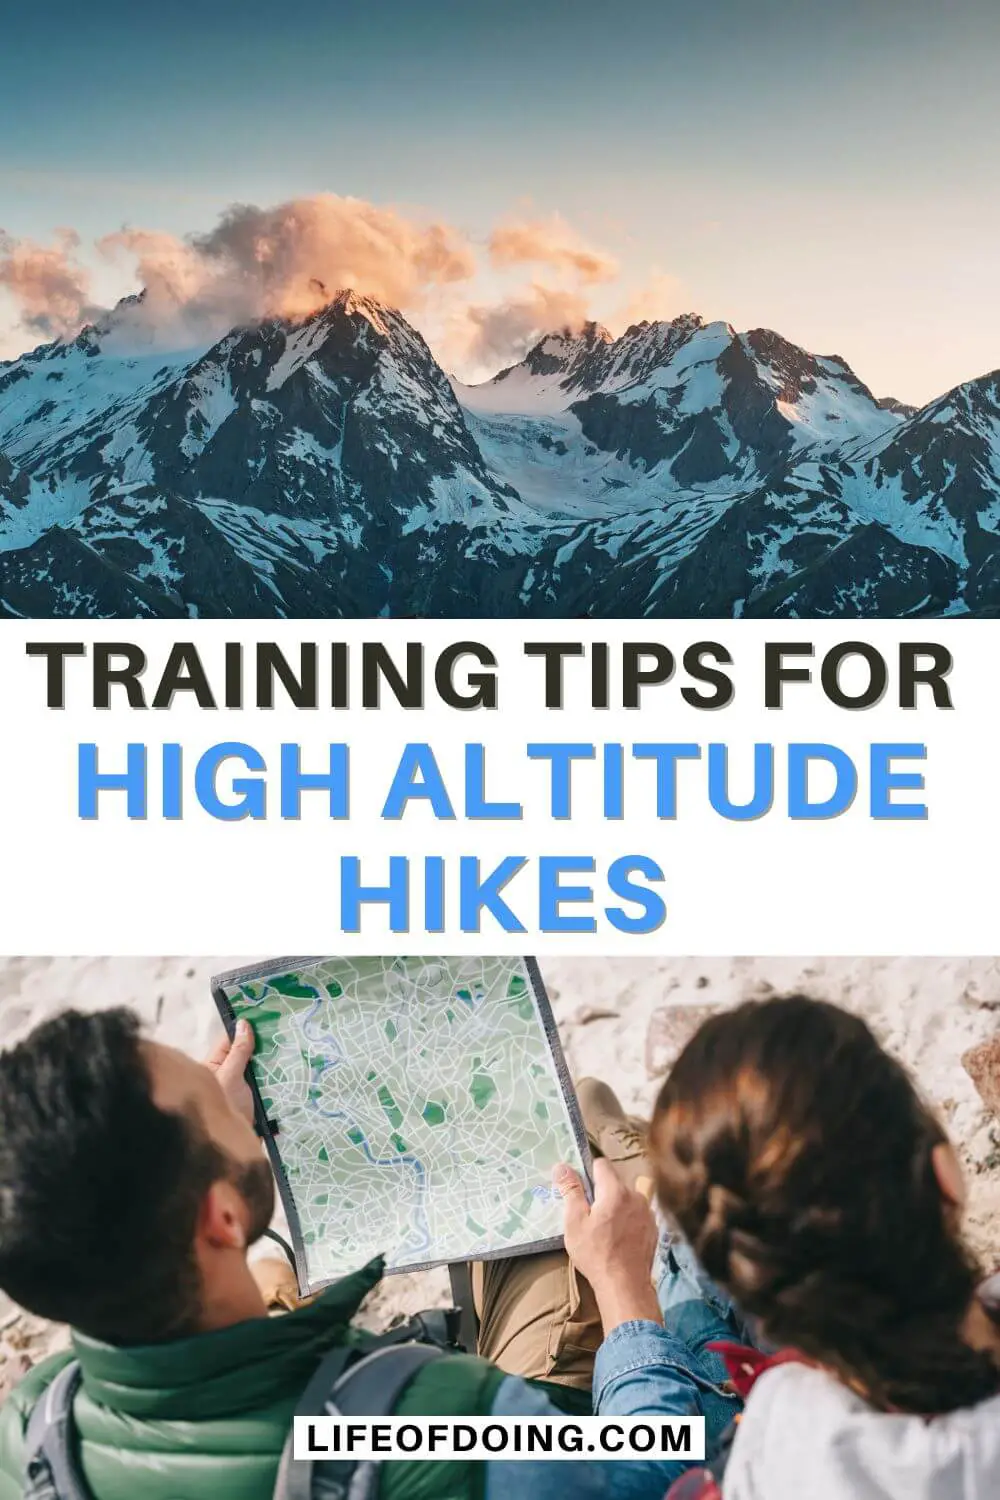 Top photo is of a snow capped mountain and bottom photo is of a man and women reading a map during a hiking experience